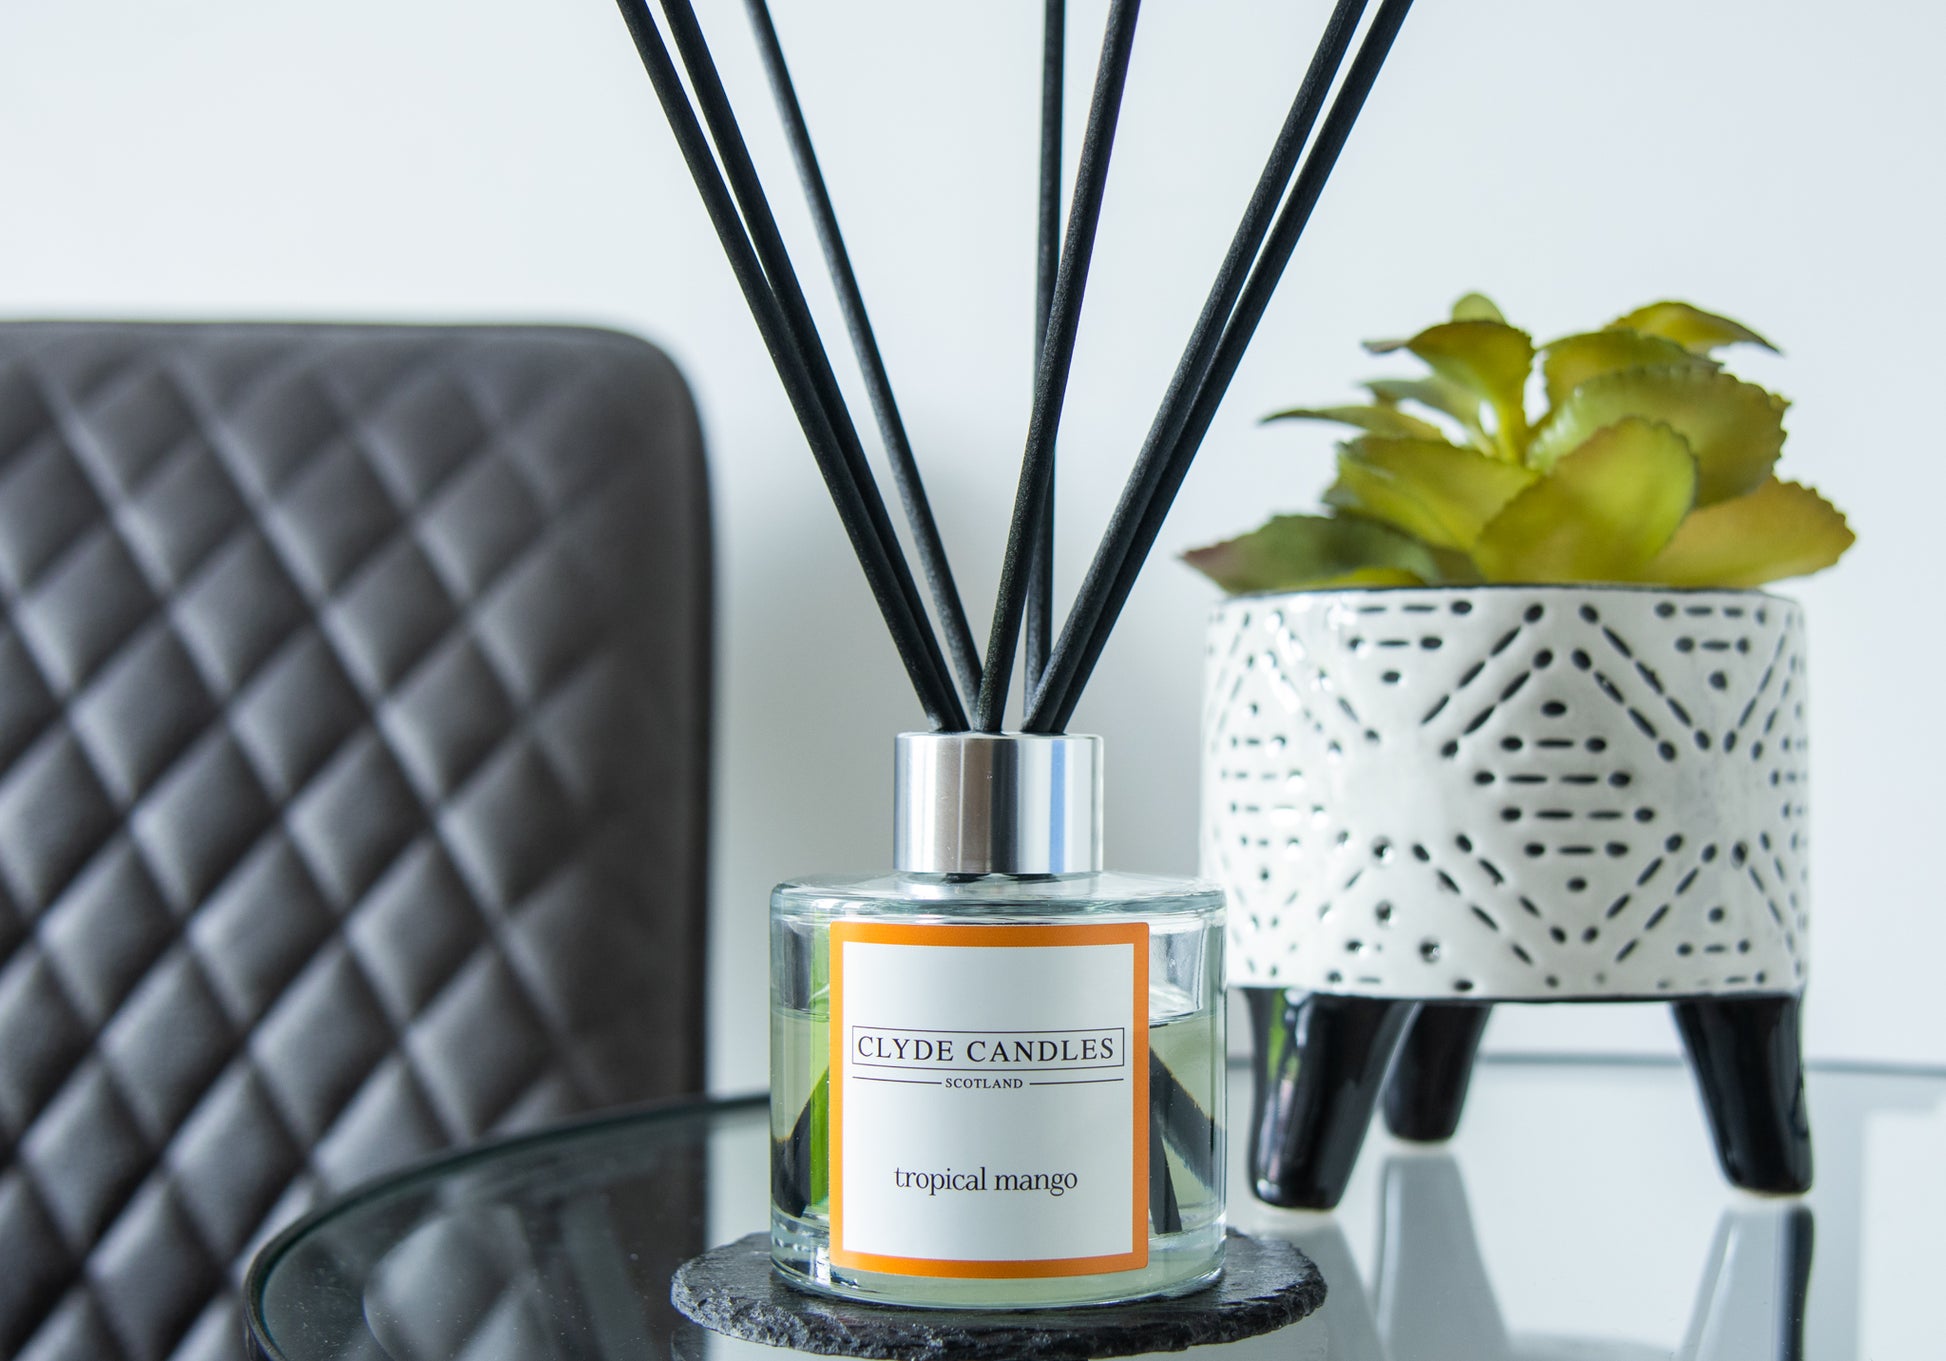 tropical mango Reed Diffuser - Clyde Candles, Luxury Diffuser Oil with a Set of 7 Fibre Sticks, 100ml, Best Aroma Scent for Home, Kitchen, Living Room, Bathroom. Fragrance Diffusers set with sticks